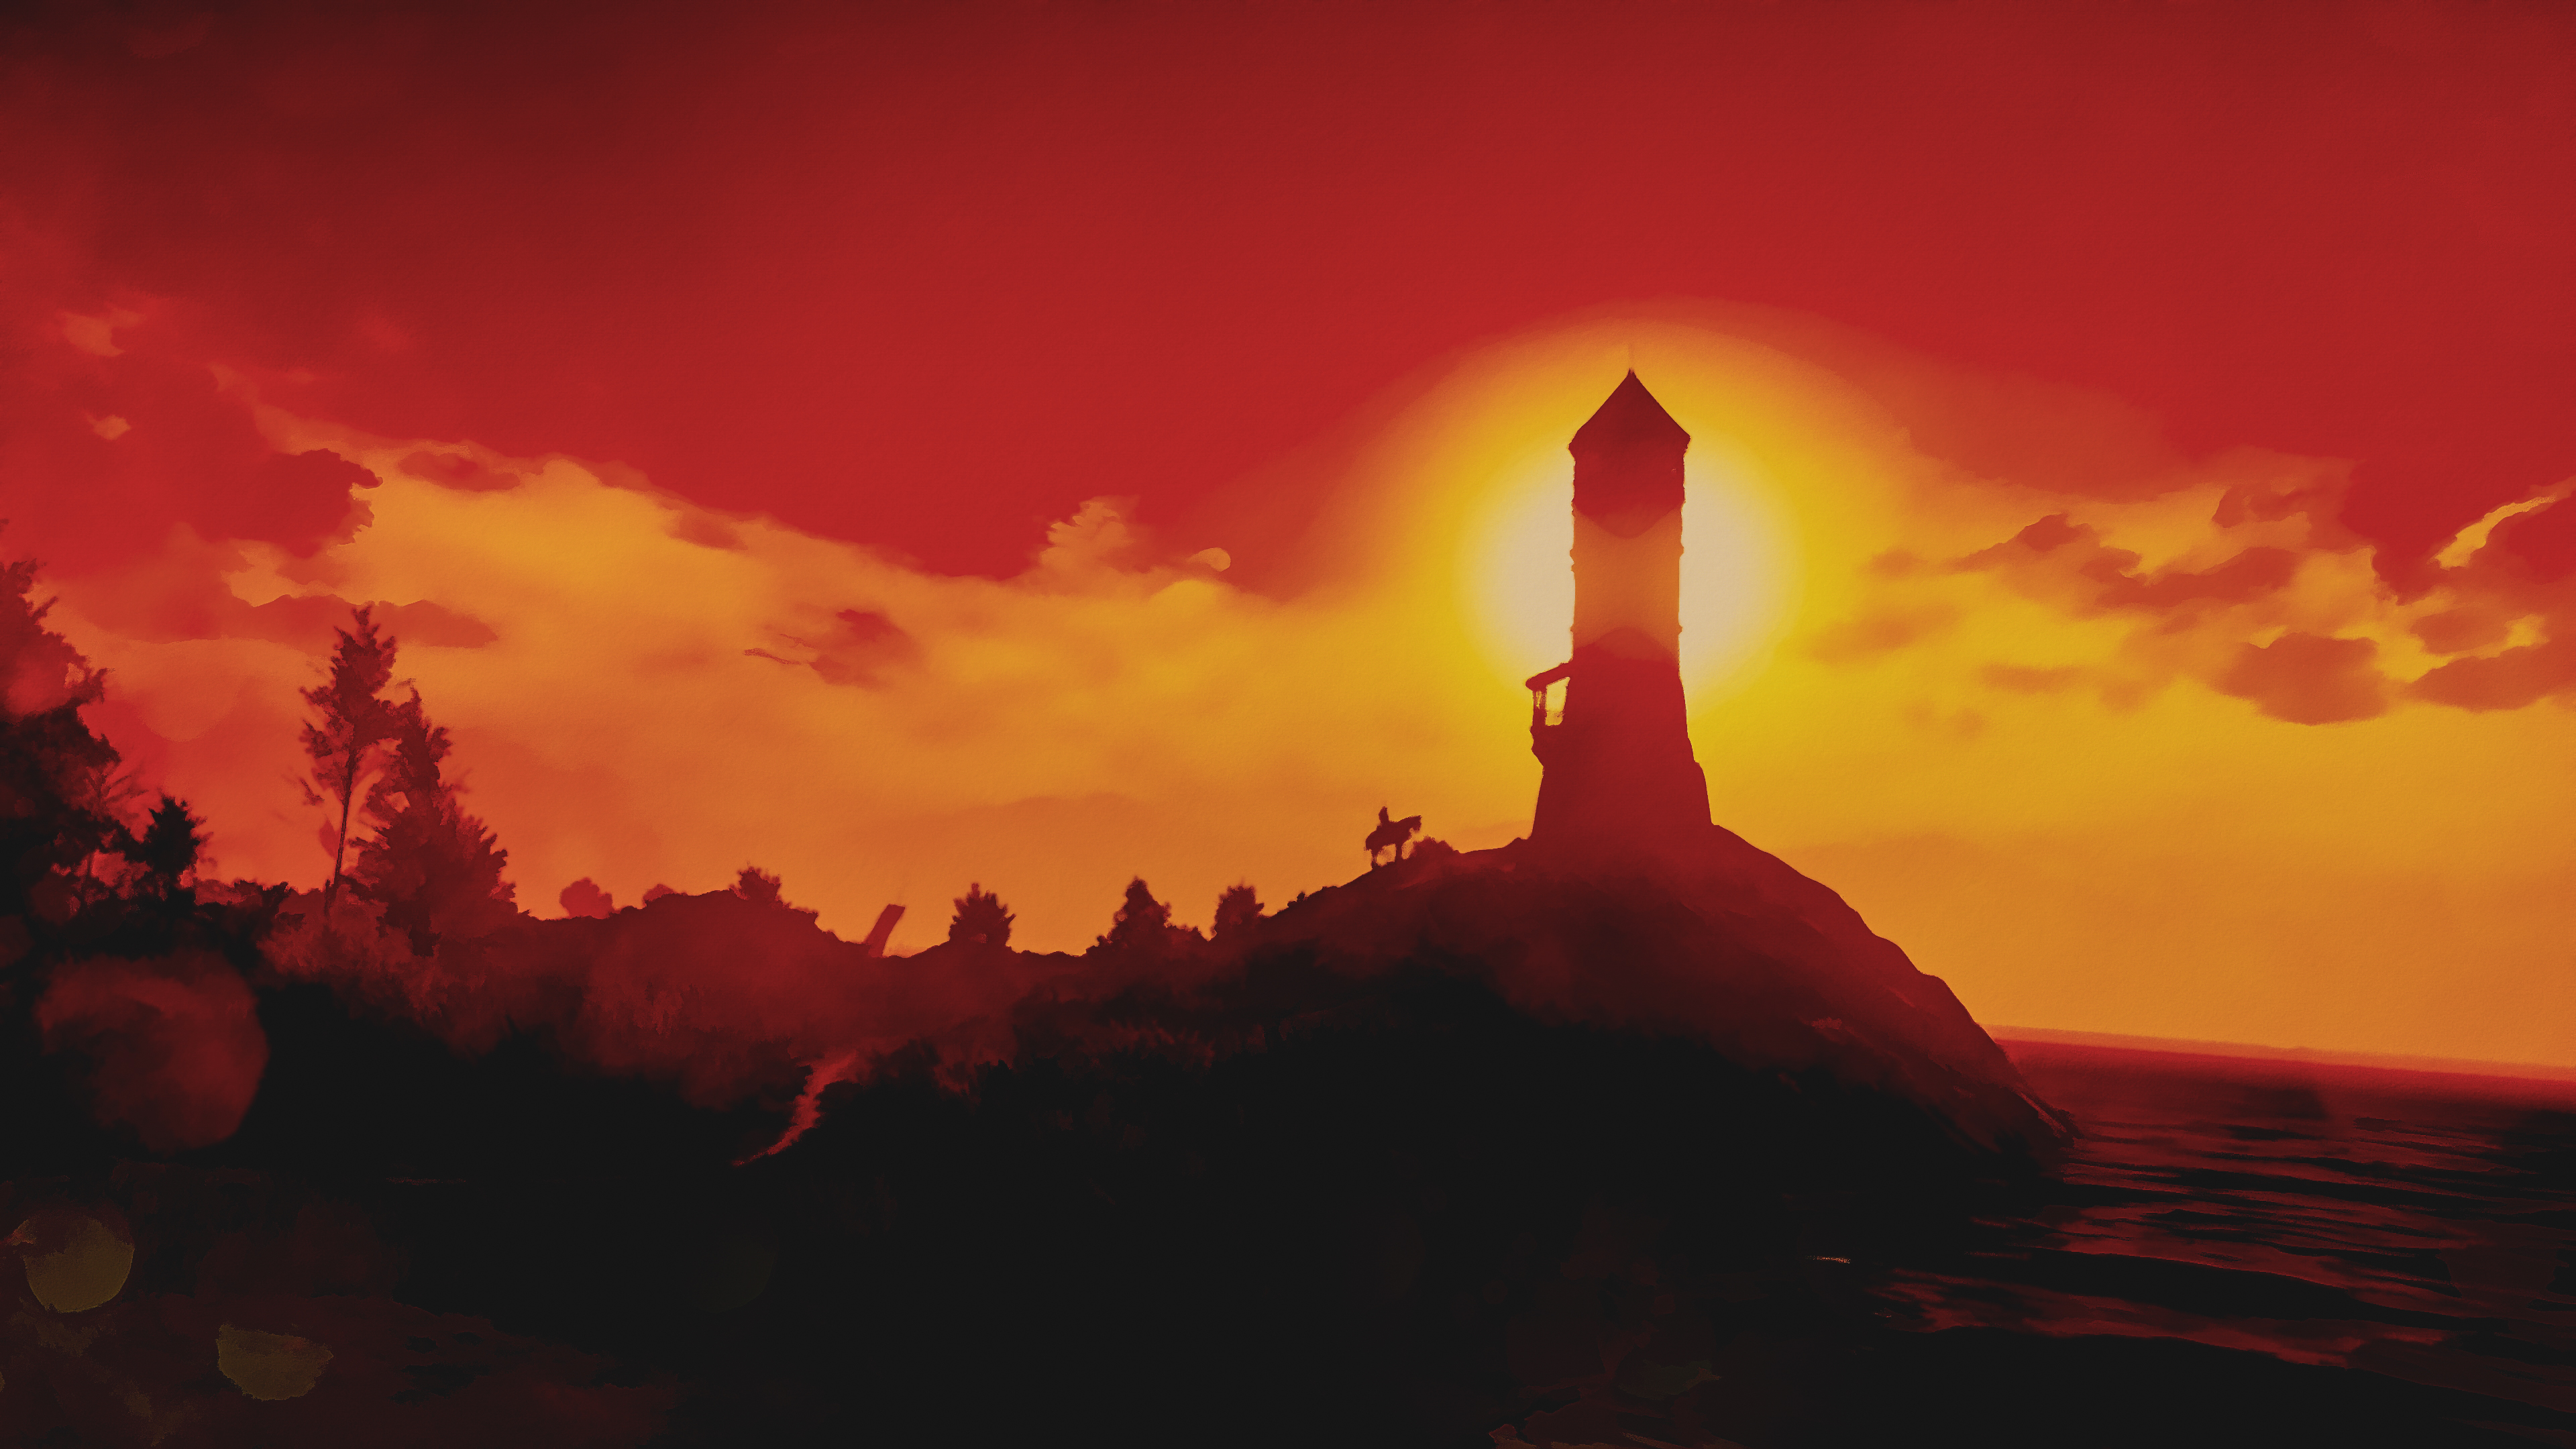 The Witcher The Witcher 3 Wild Hunt Light House Artwork Sunset Sea Horse Peninsula 3840x2160